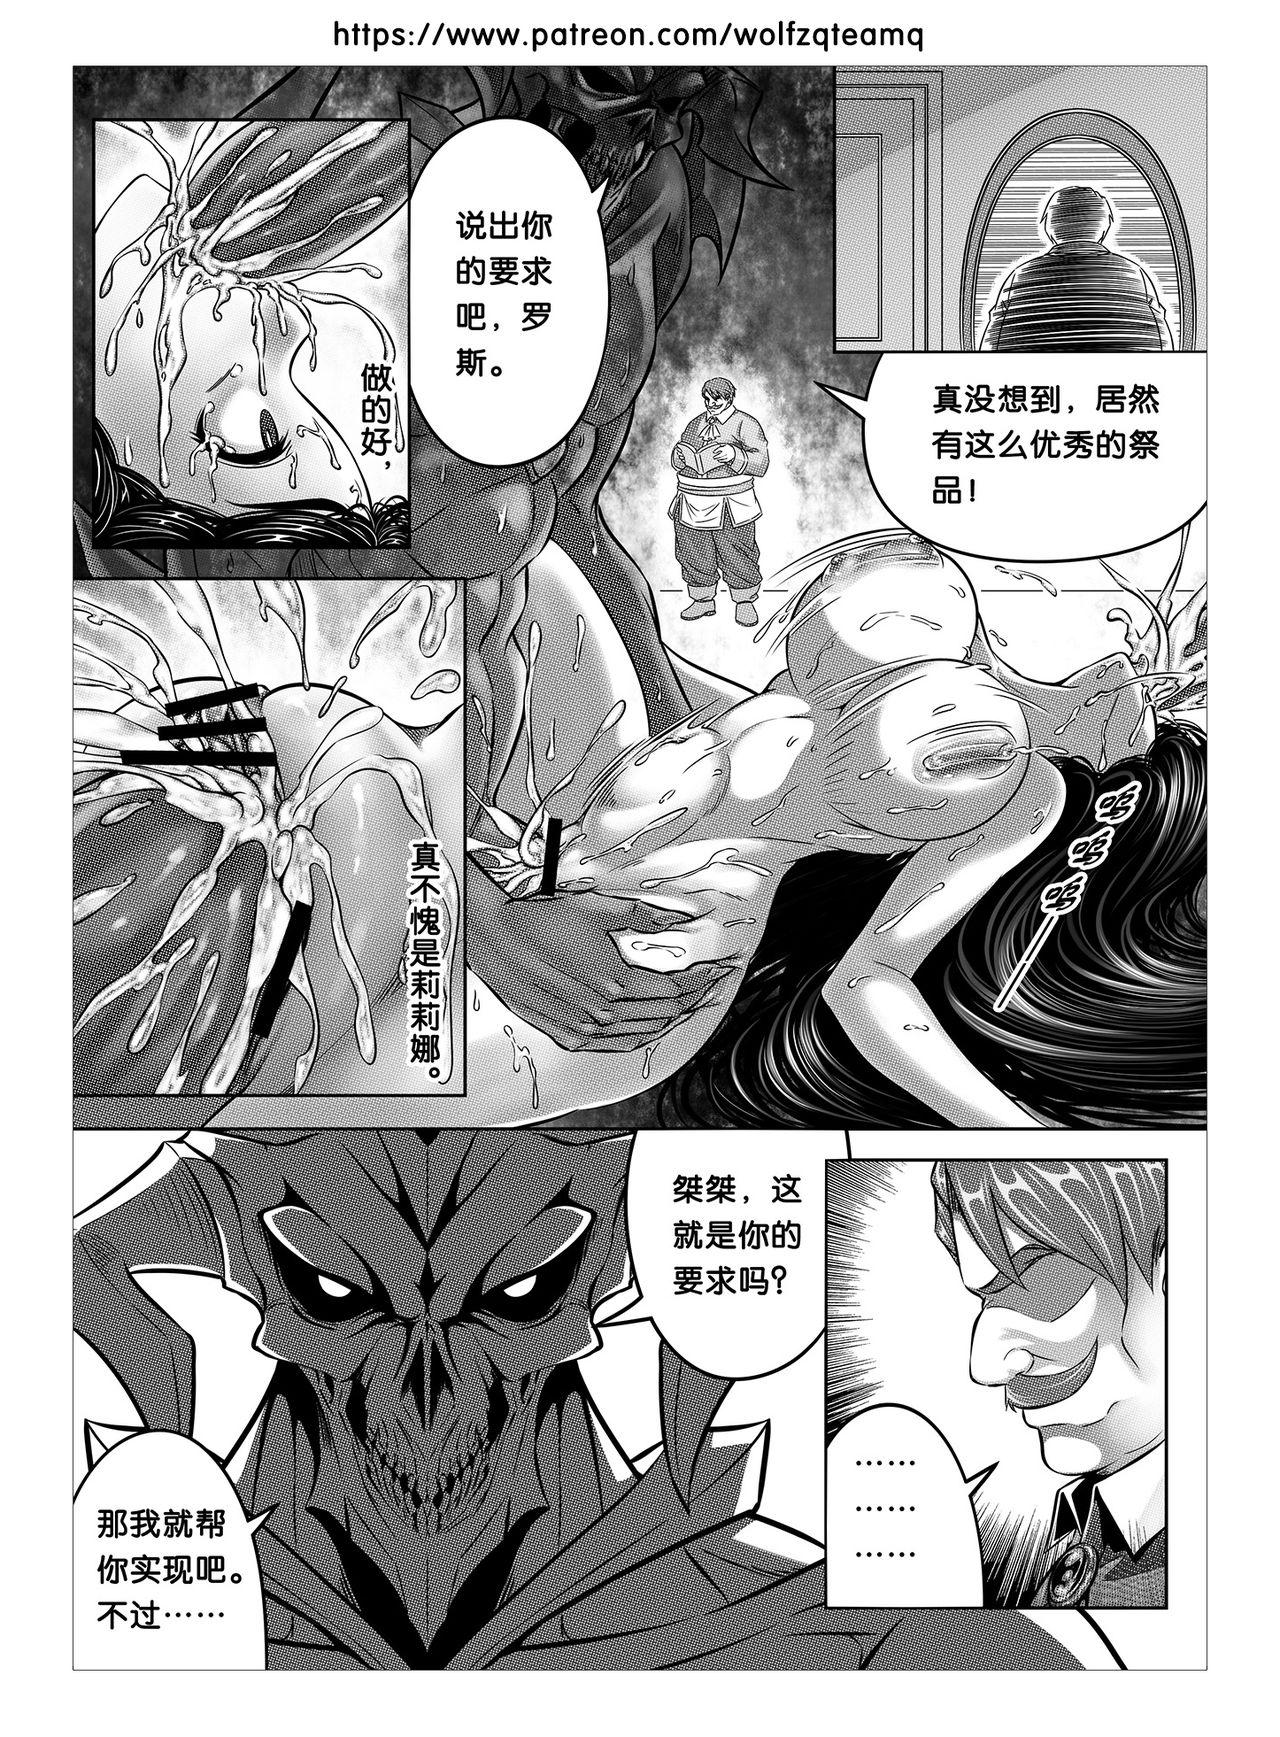 Euro Porn Bad End Of Cursed Armor College Line（诅咒铠甲学院线）Chinese Sex Tape - Page 5